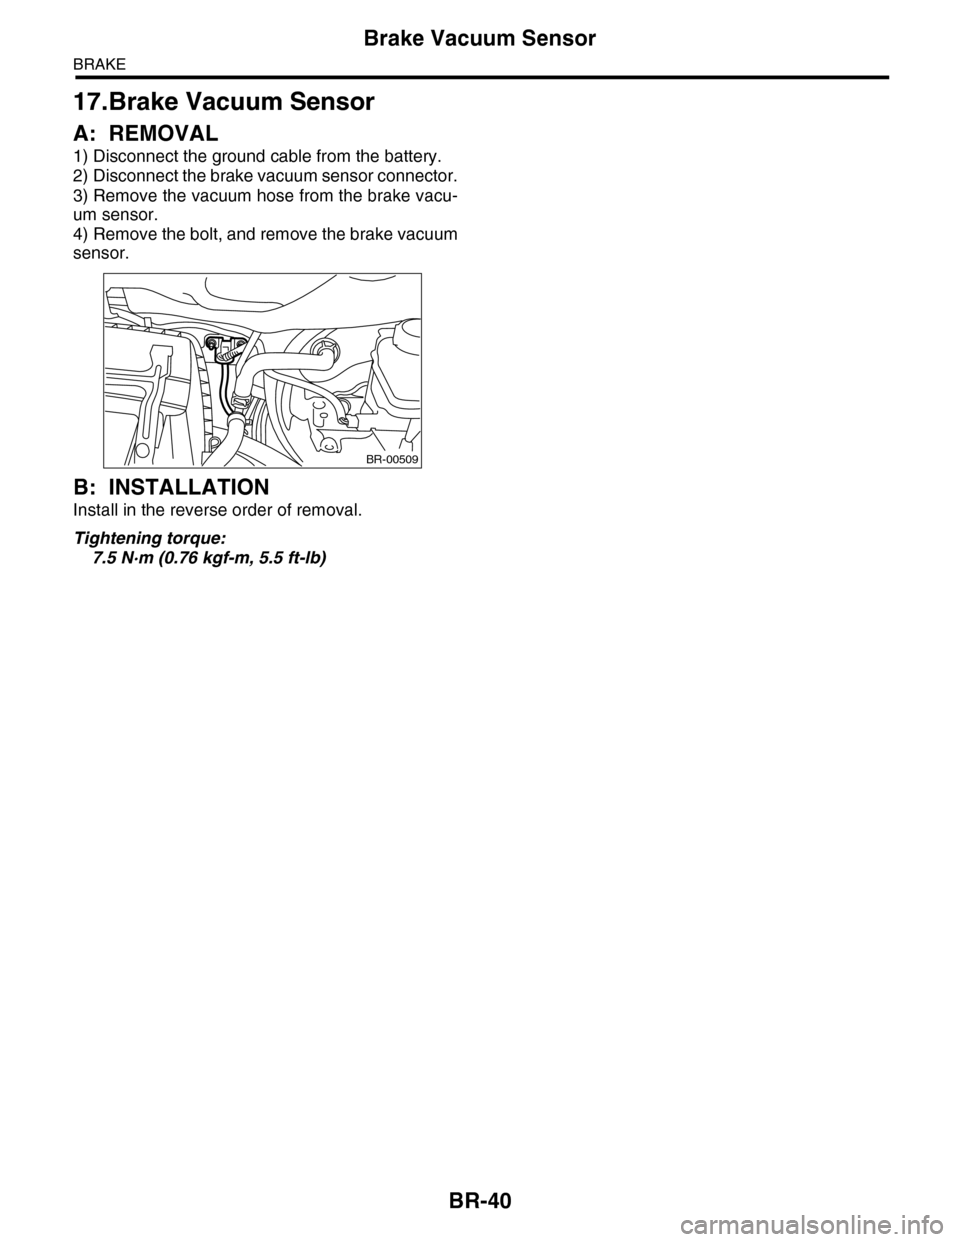 SUBARU TRIBECA 2009 1.G Service Workshop Manual BR-40
Brake Vacuum Sensor
BRAKE
17.Brake Vacuum Sensor
A: REMOVAL
1) Disconnect the ground cable from the battery.
2) Disconnect the brake vacuum sensor connector.
3) Remove the vacuum hose from the b